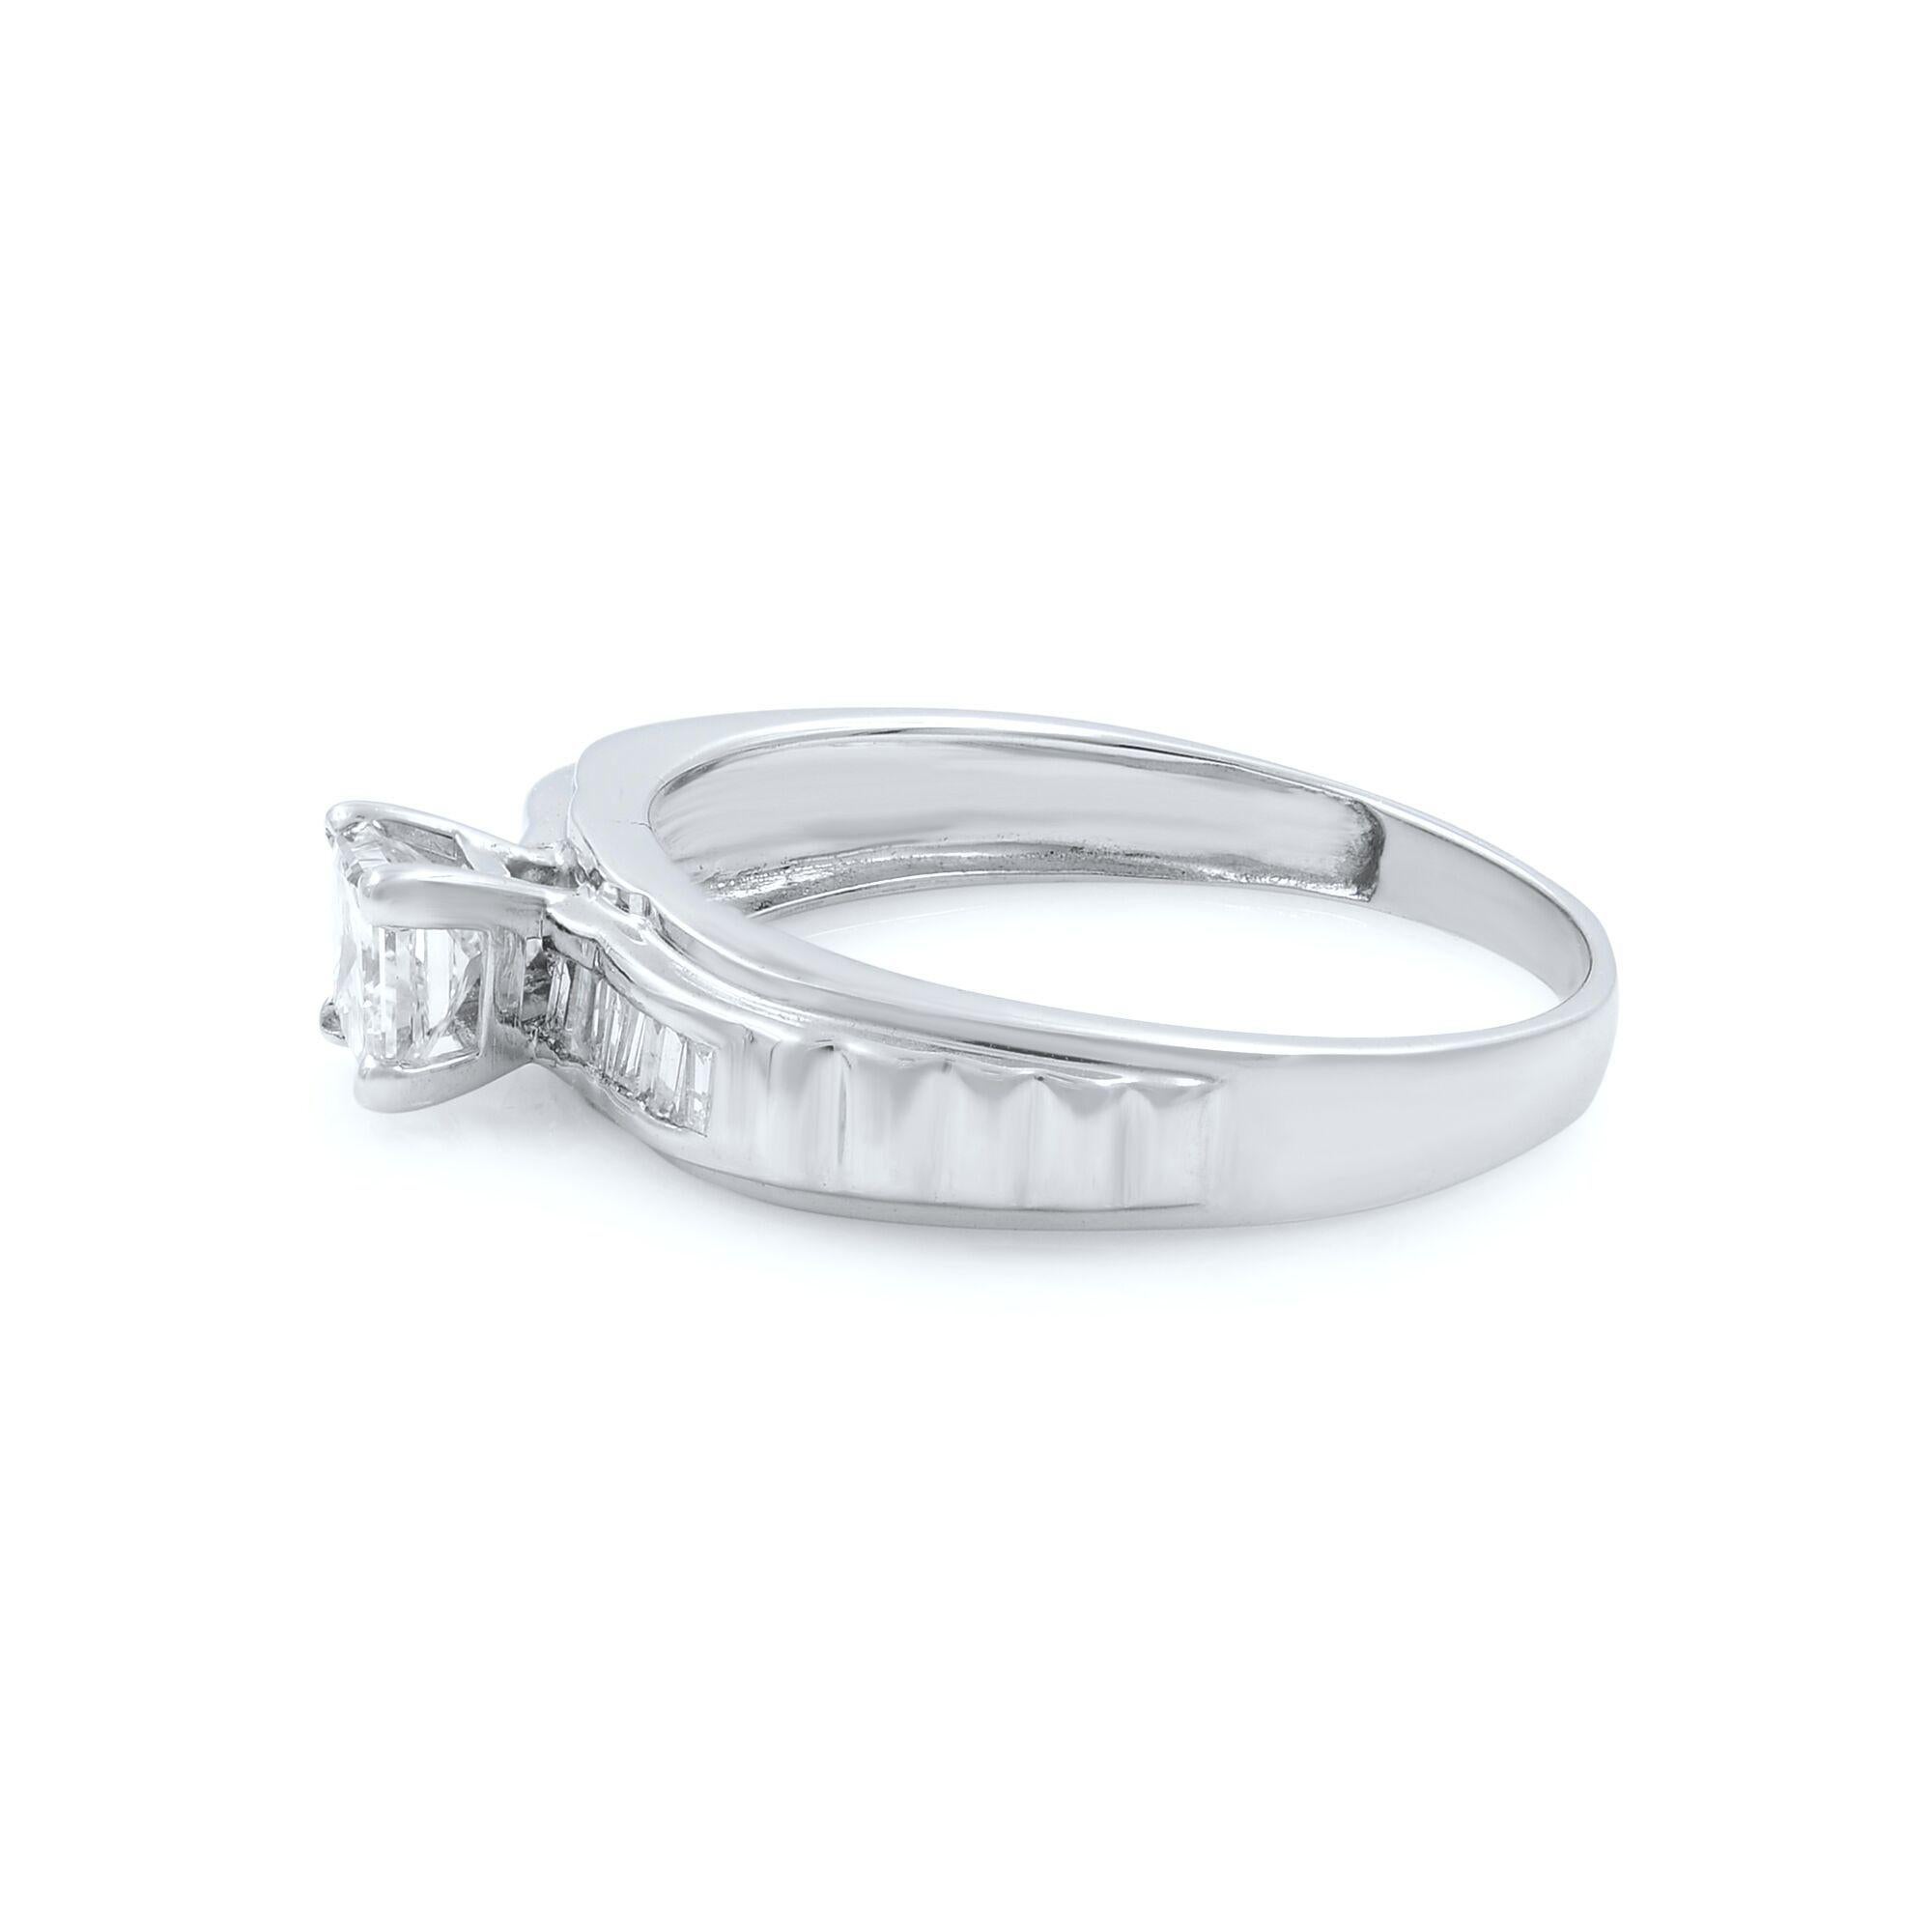 Stunning princess cut diamond ring beautifully set in a very elegant high polished 18K white gold mounting and accented with 14 channel set baguette cut diamonds weighing 0.10ct. The center princess cut stone is Non-Enhanced weighing 0.60ct with